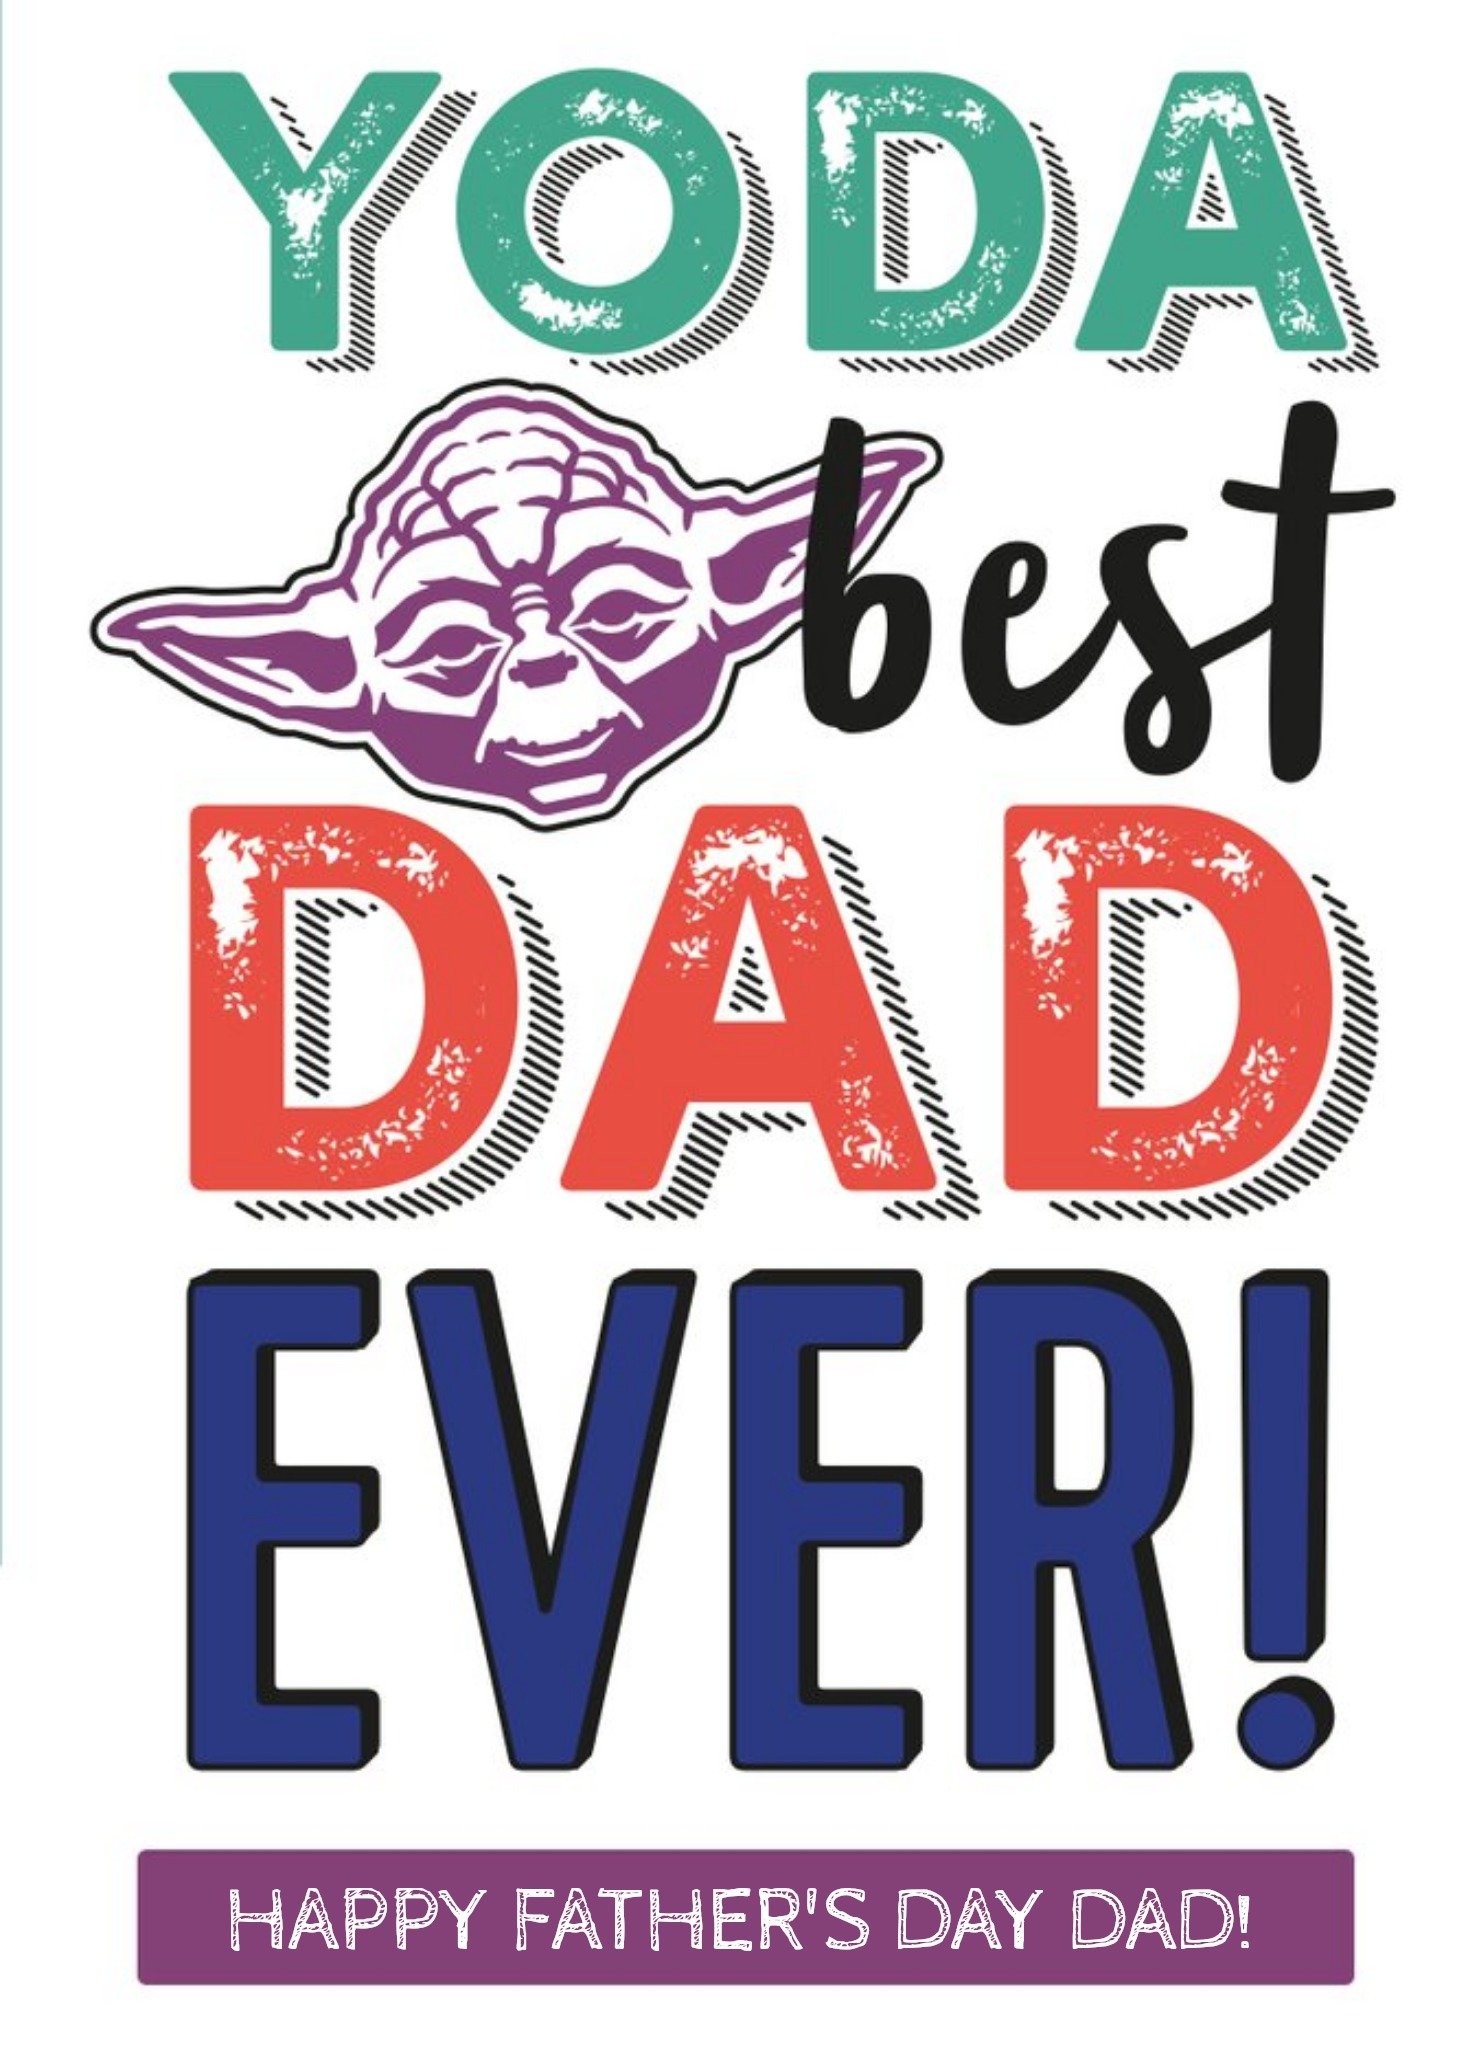 Disney Star Wars Yoda Best Dad Ever Father's Day Card, Large